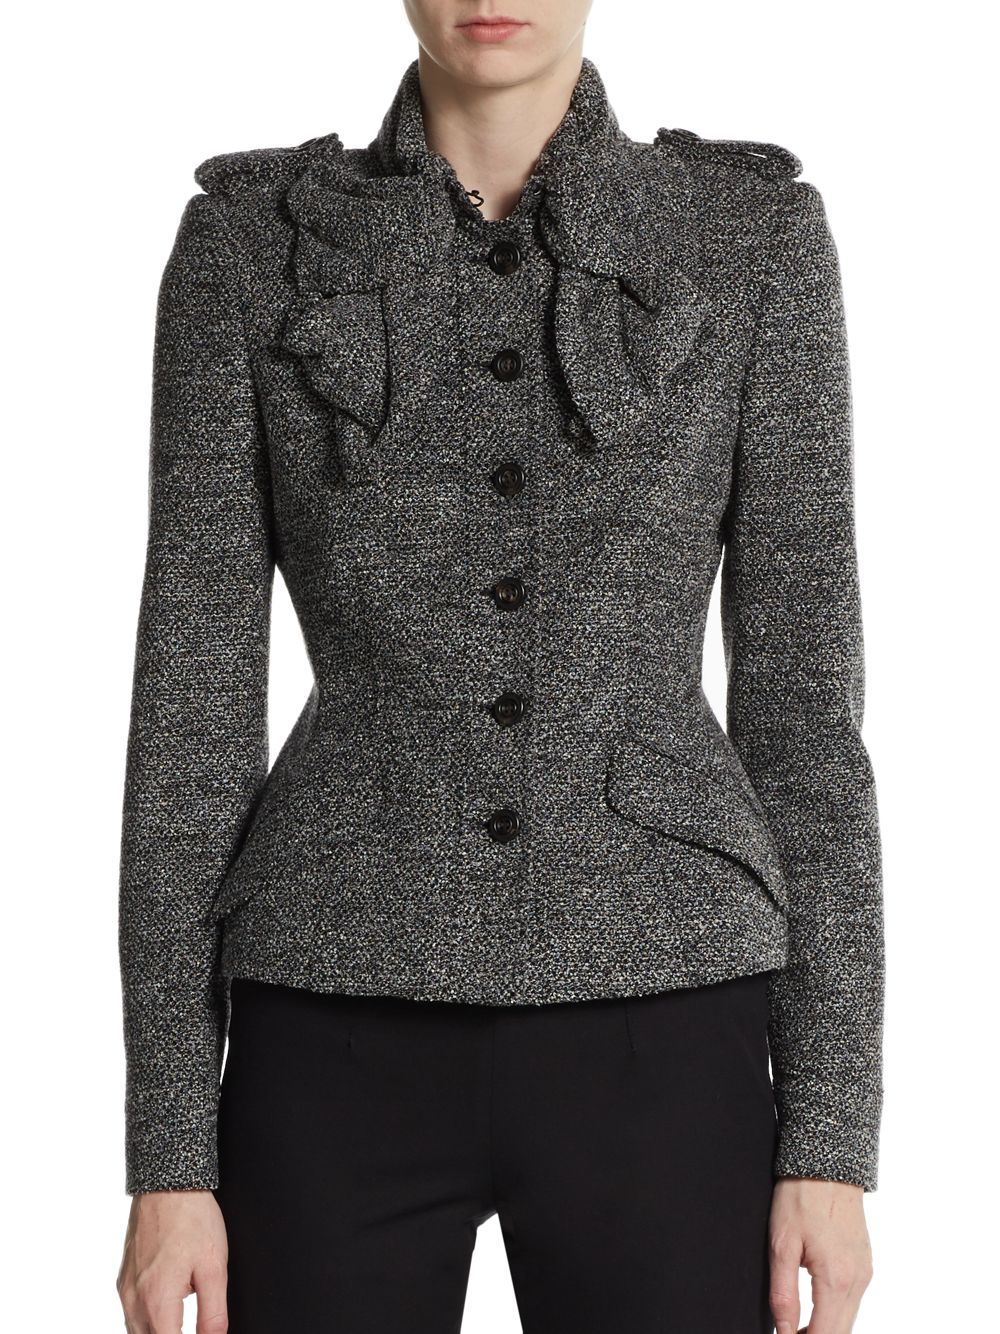 Lyst - Burberry Prorsum Tweed Ruffle Front Jacket in Gray